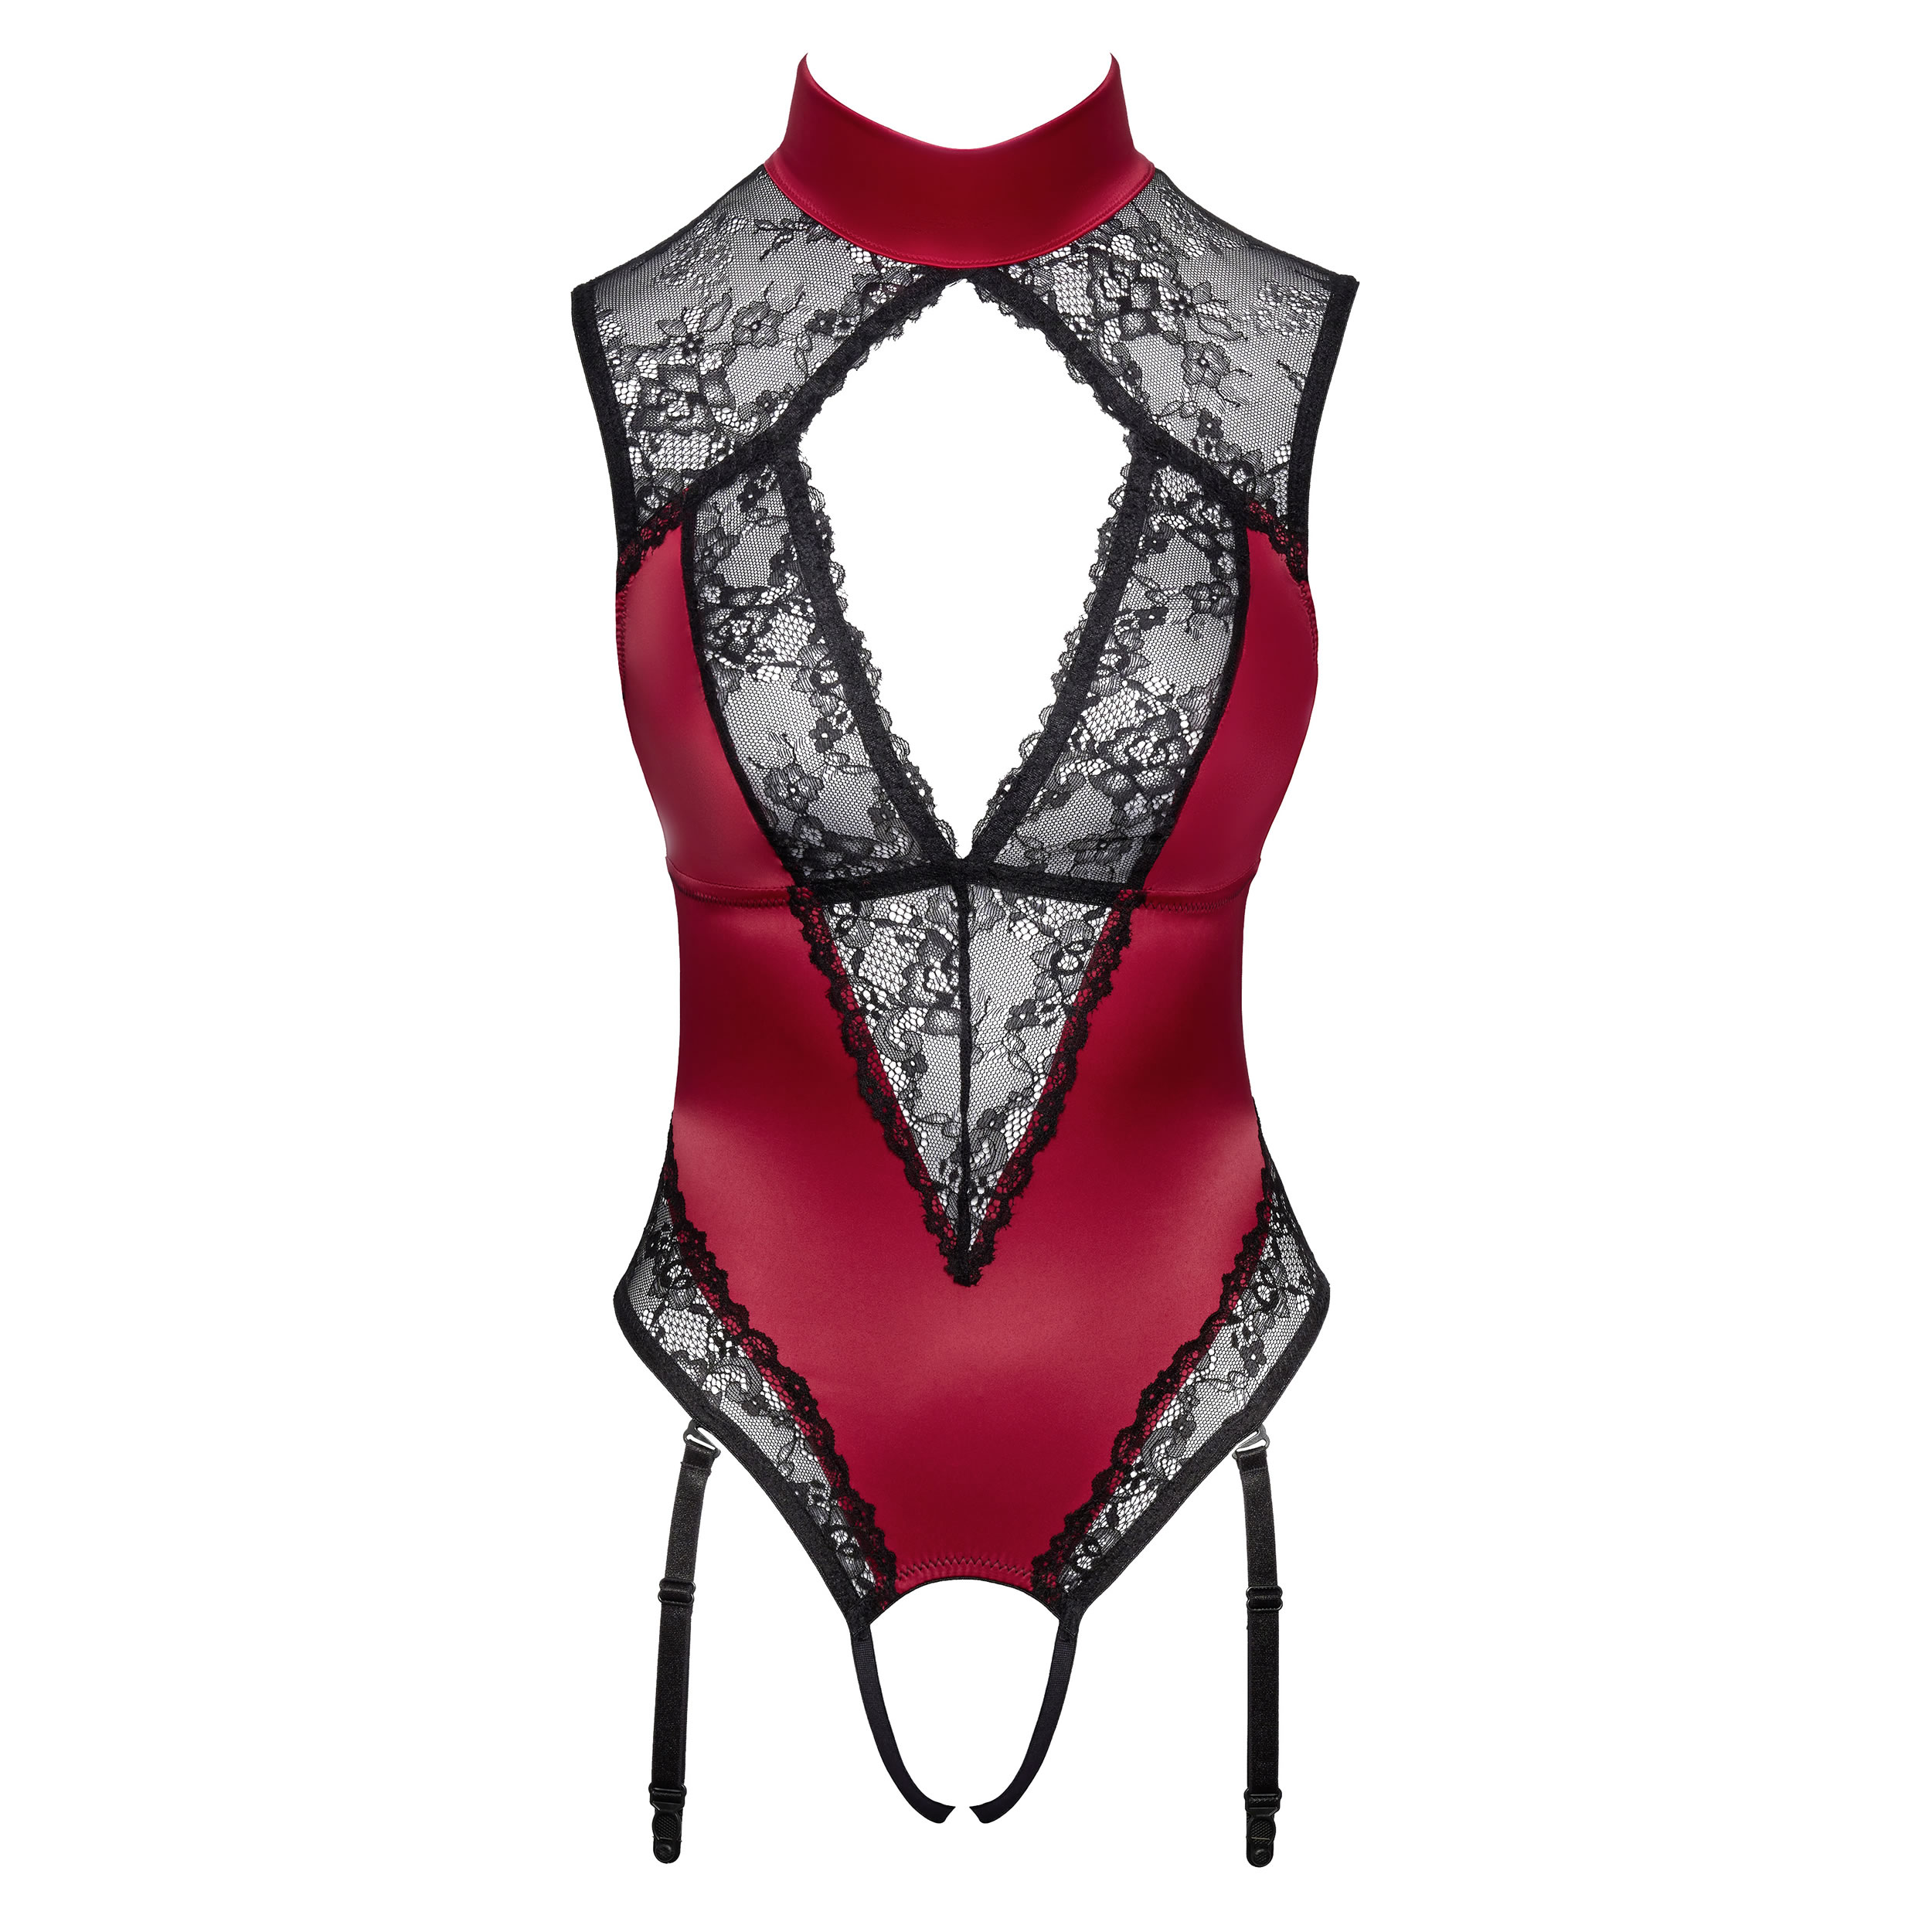 Crotchless Satin and Lace Bodysuit in Red and Black